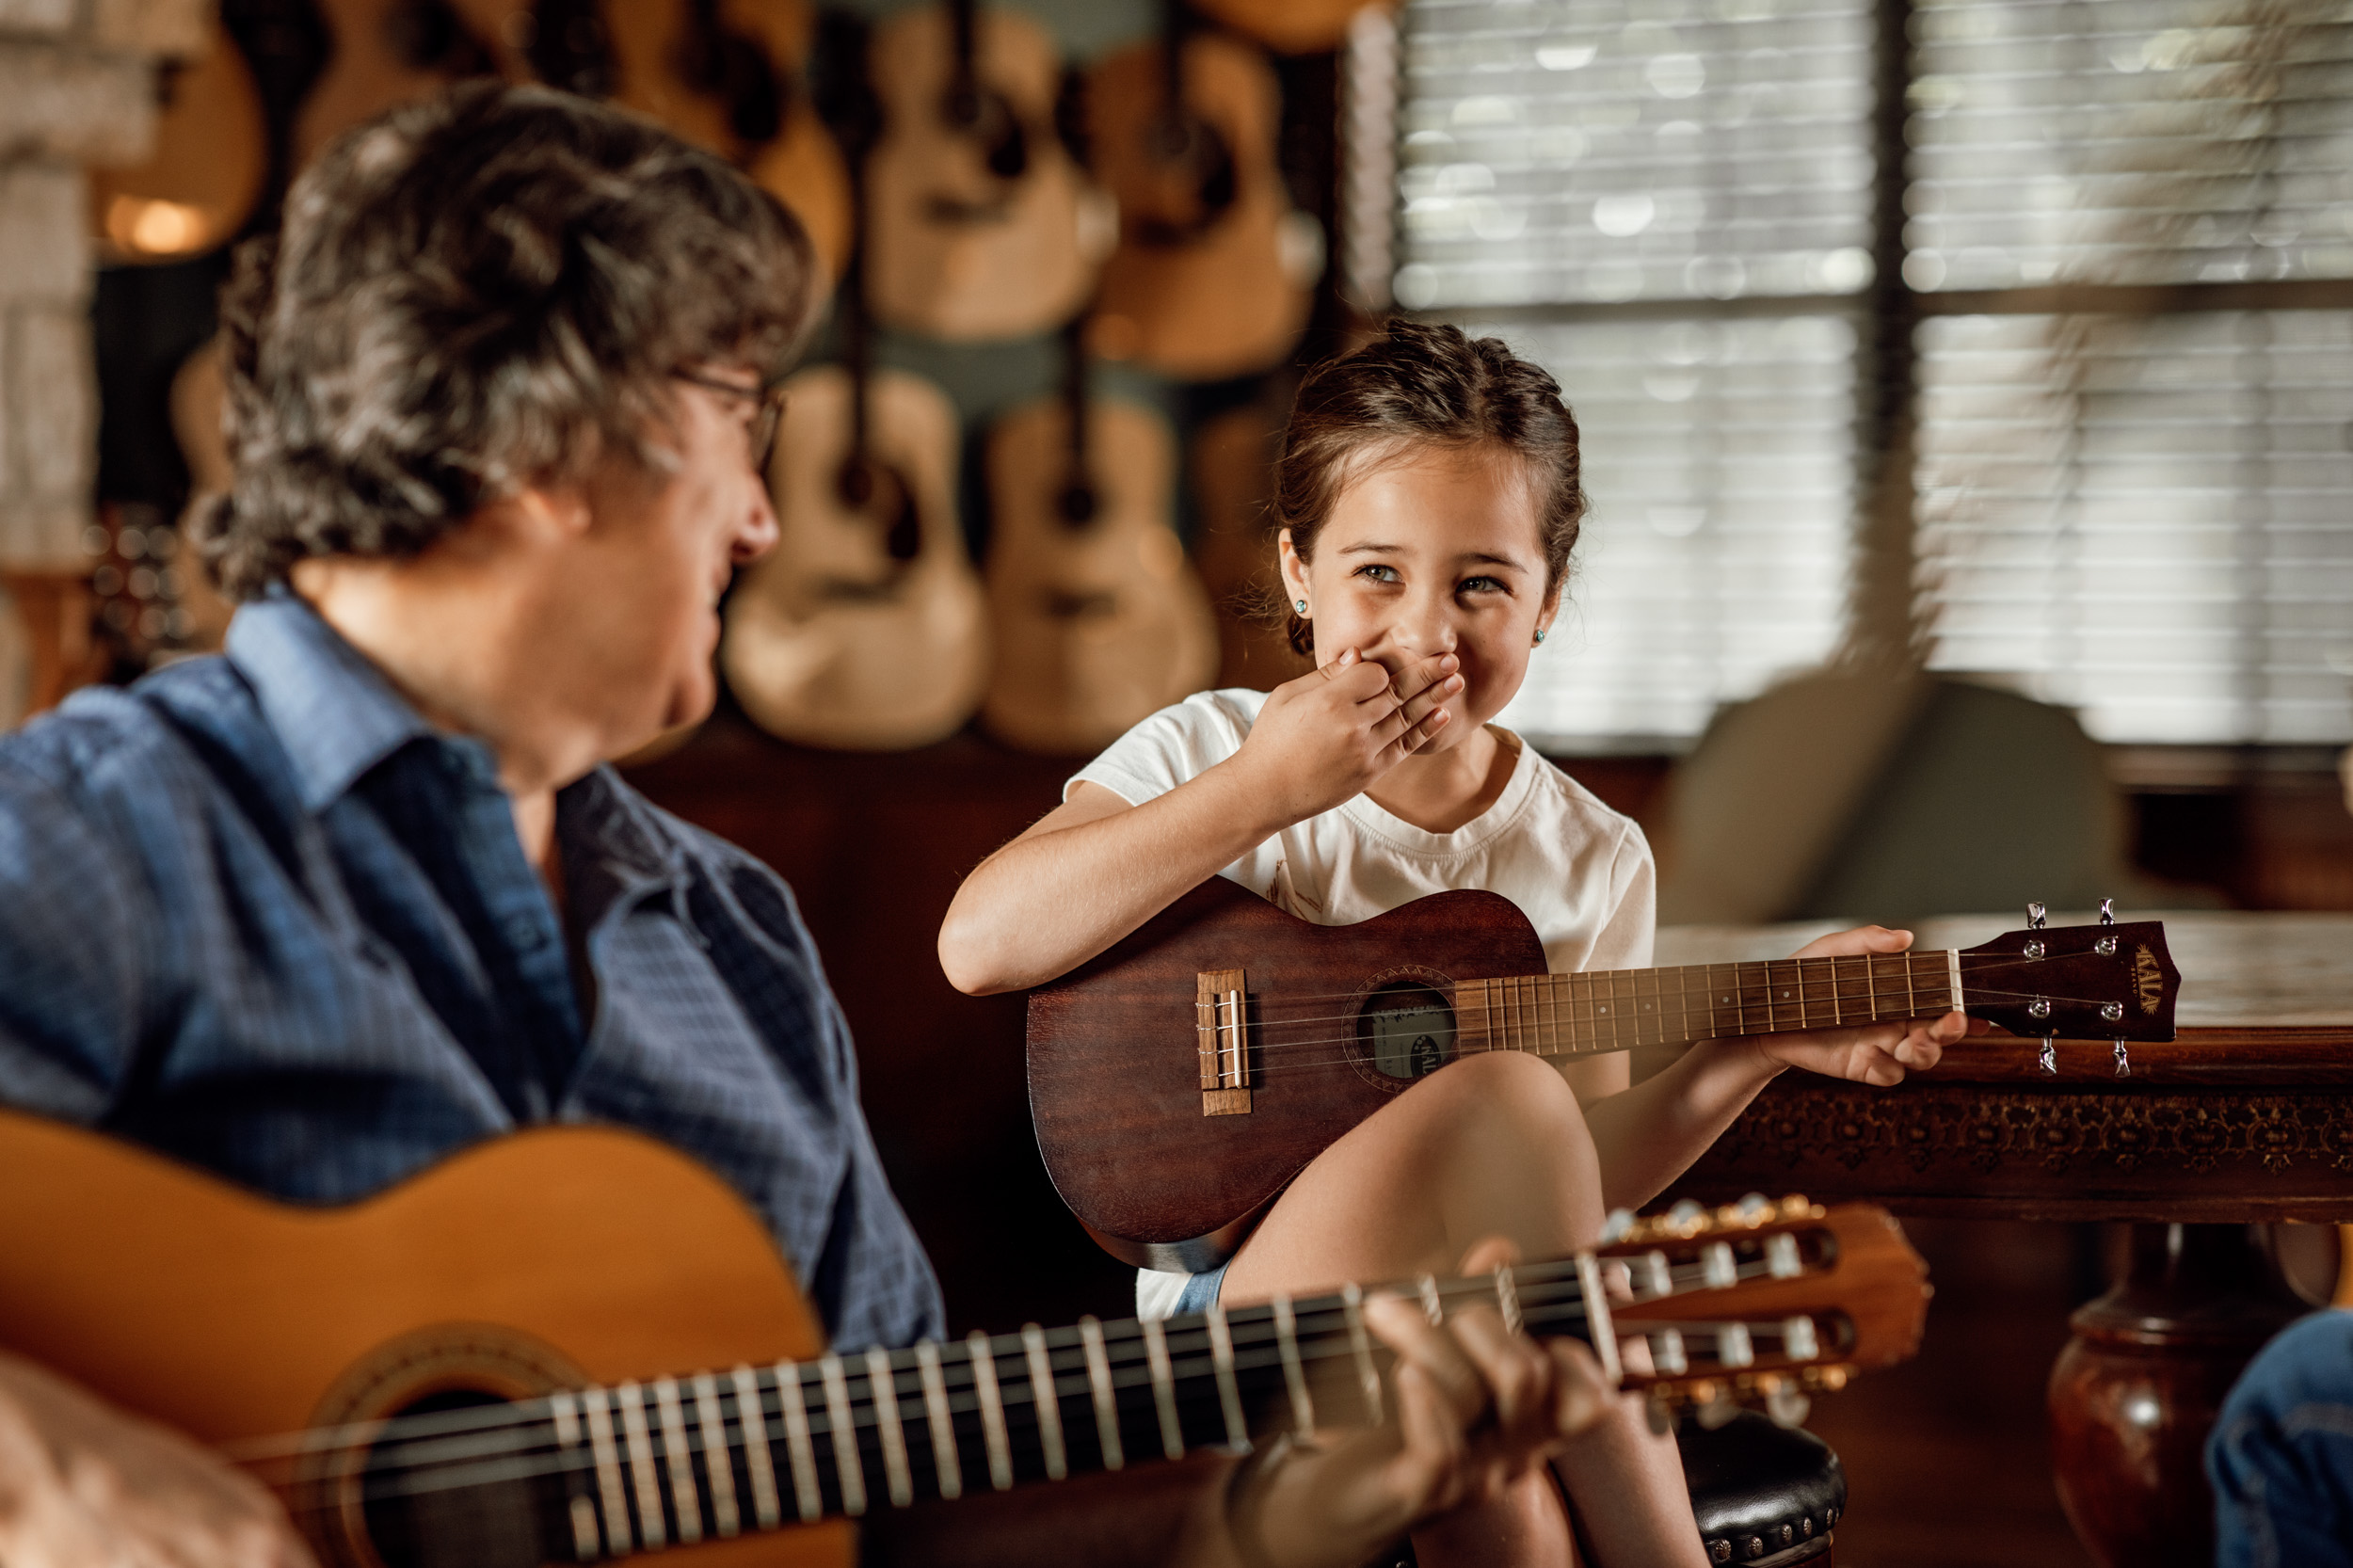 young girl guitar student laughs with instructor